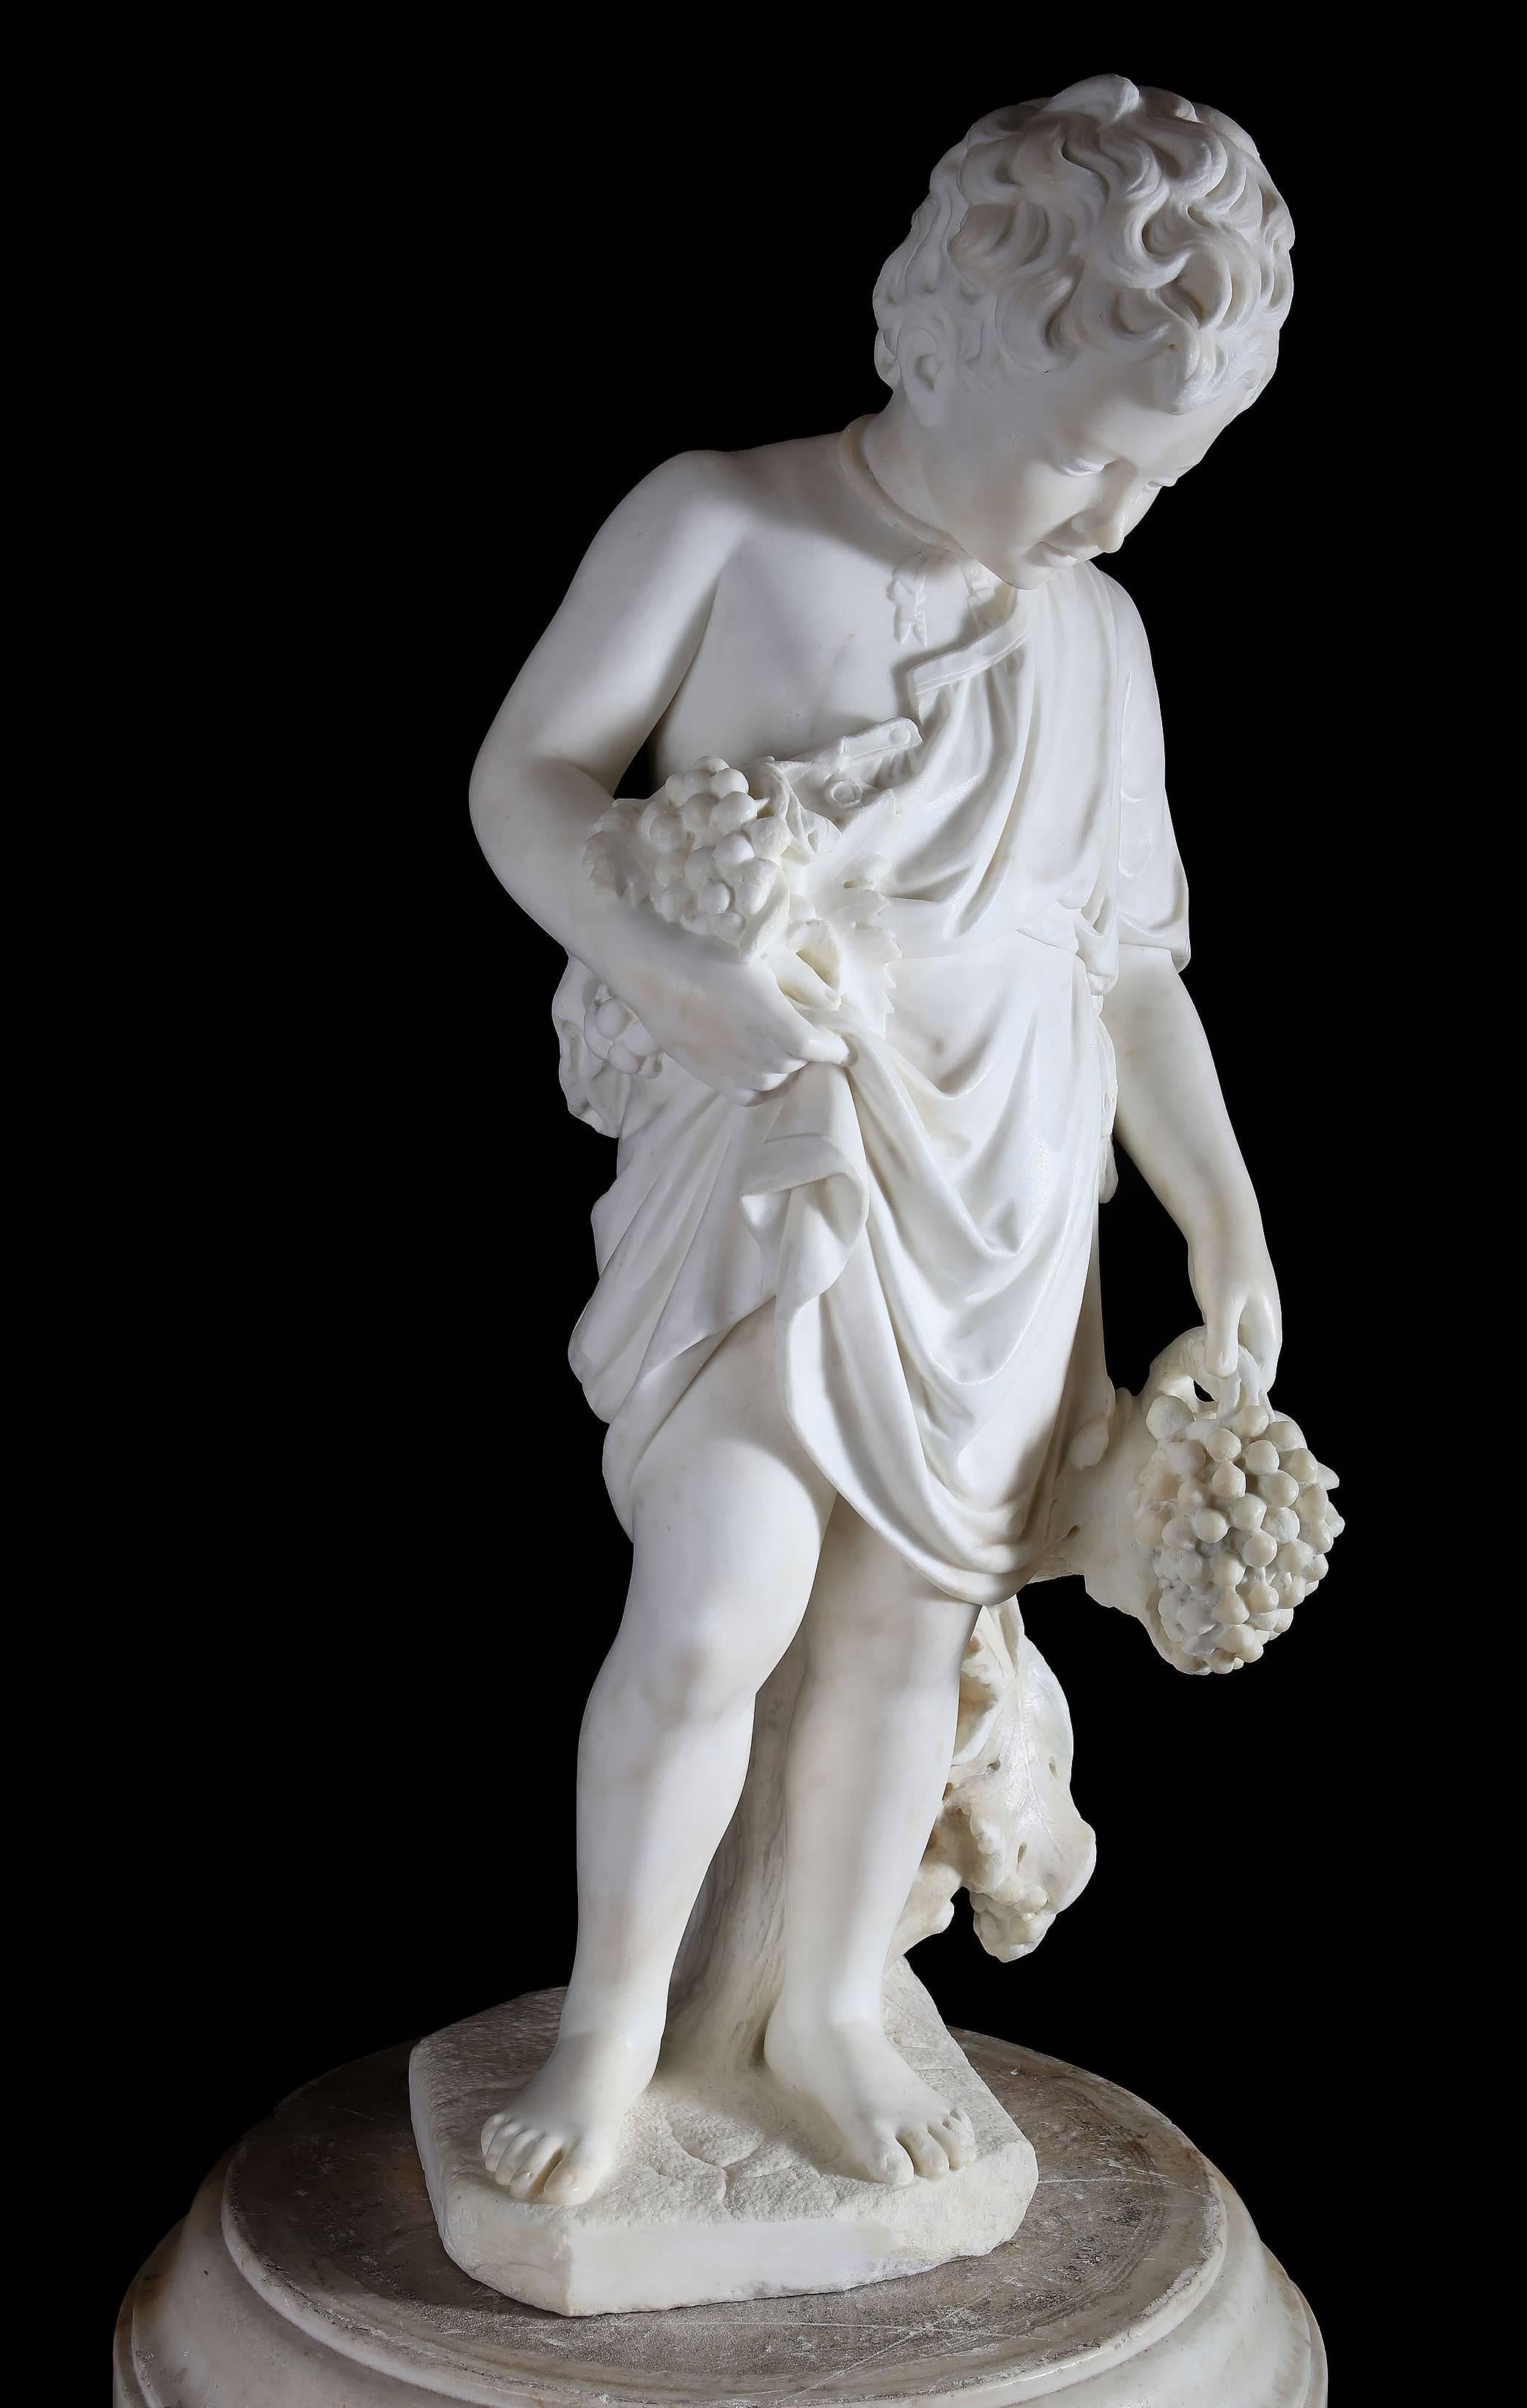 Important and extremely rare 19th century carved marble figure of young Roman God Bacchus (also known as Dionysus in Greek) as autumn by Professore Giuseppe Lazzerini, circa 1862.

The rarity and attention to detail on this wonderful carved and